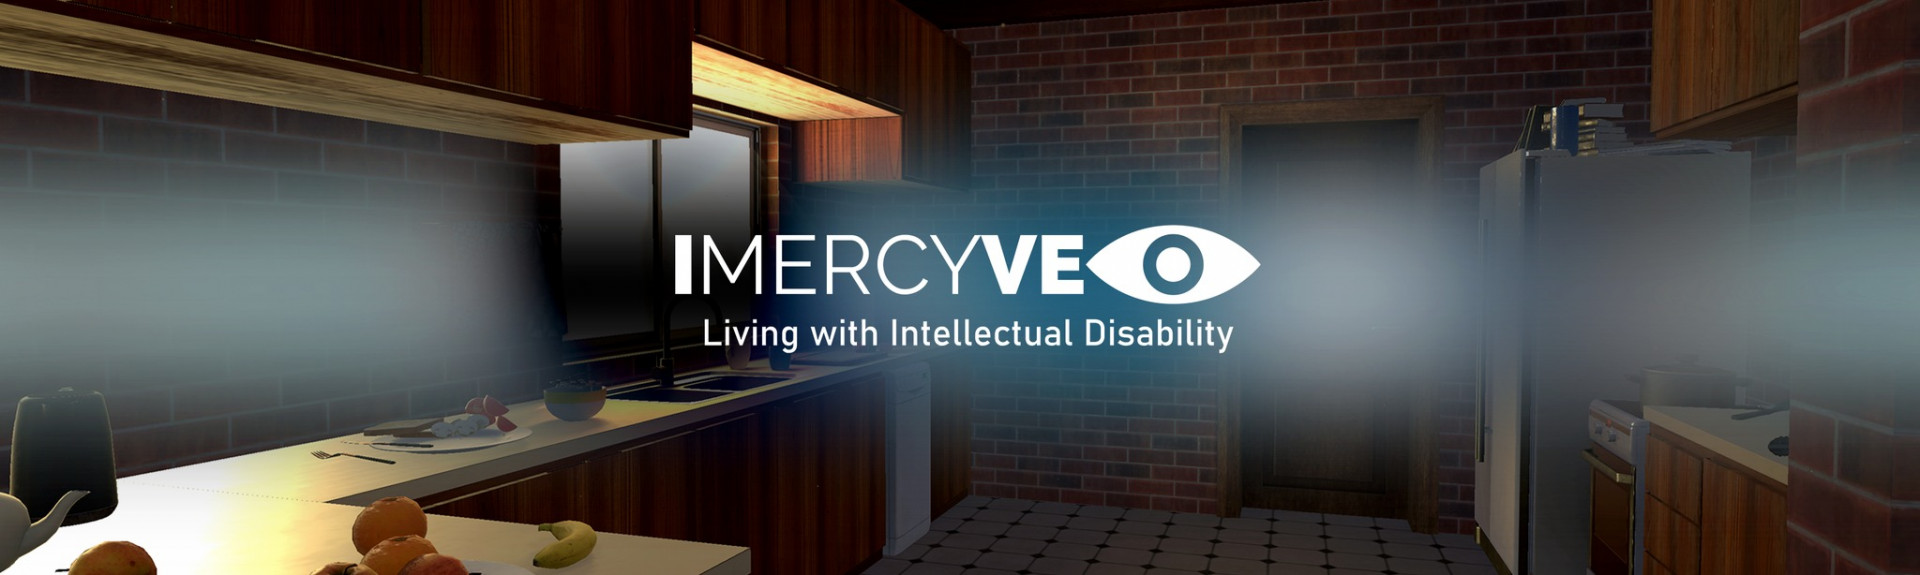 Imercyve: Living with Intellectual Disability